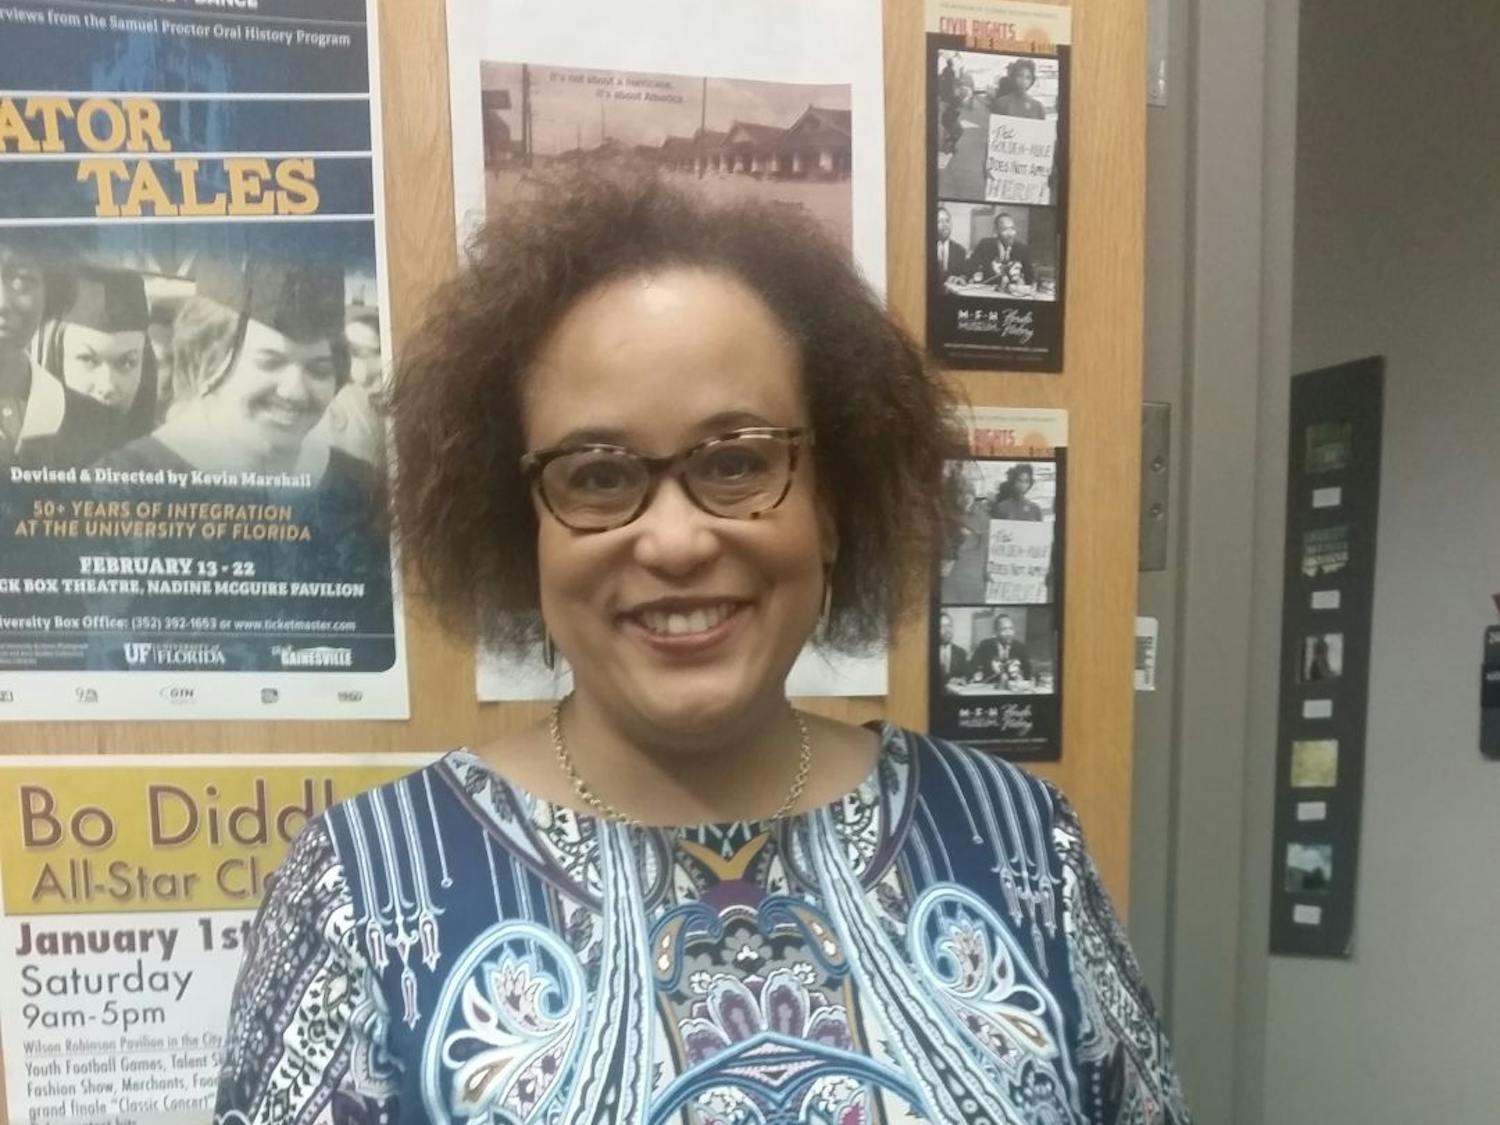 Duchess Harris, a&nbsp;Macalester College American studies professor, spoke to about 80 people Thursday evening in Smathers Library. Her grandmother Miriam Mann was a “human computer” in the 1960s at NASA.&nbsp;
&nbsp;